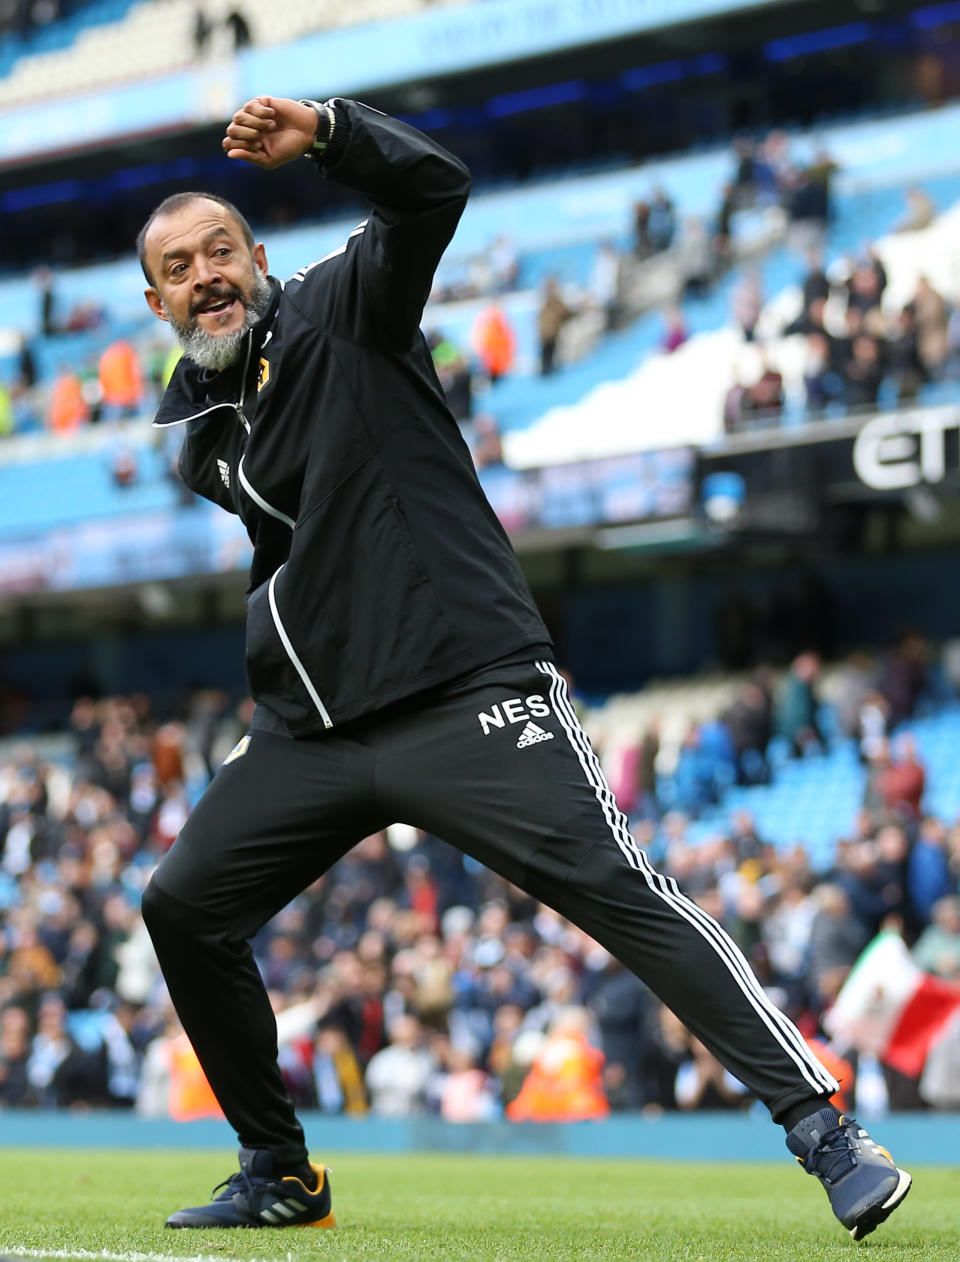 Wolverhampton Wanderers manager Nuno Espirito Santo celebrates after the final whistle Manchester City v Wolverhampton Wanderers - Premier League - Etihad Stadium 06-10-2019 . (Photo by  Nigel French/EMPICS/PA Images via Getty Images)